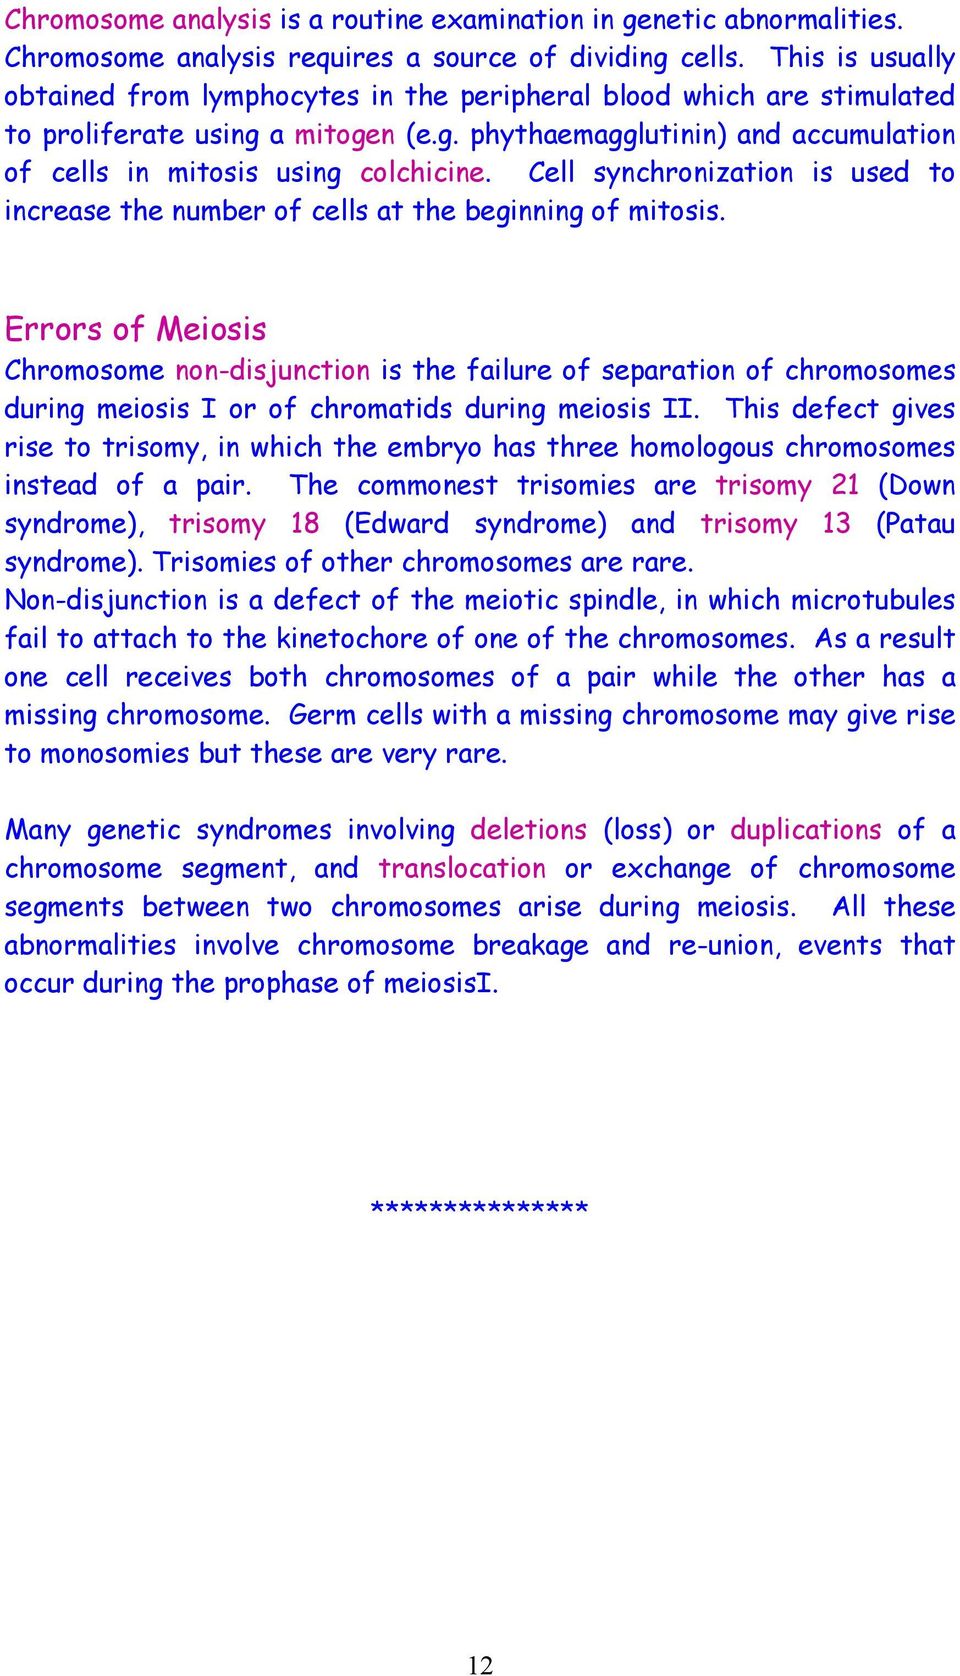 Cell synchronization is used to increase the number of cells at the beginning of mitosis.